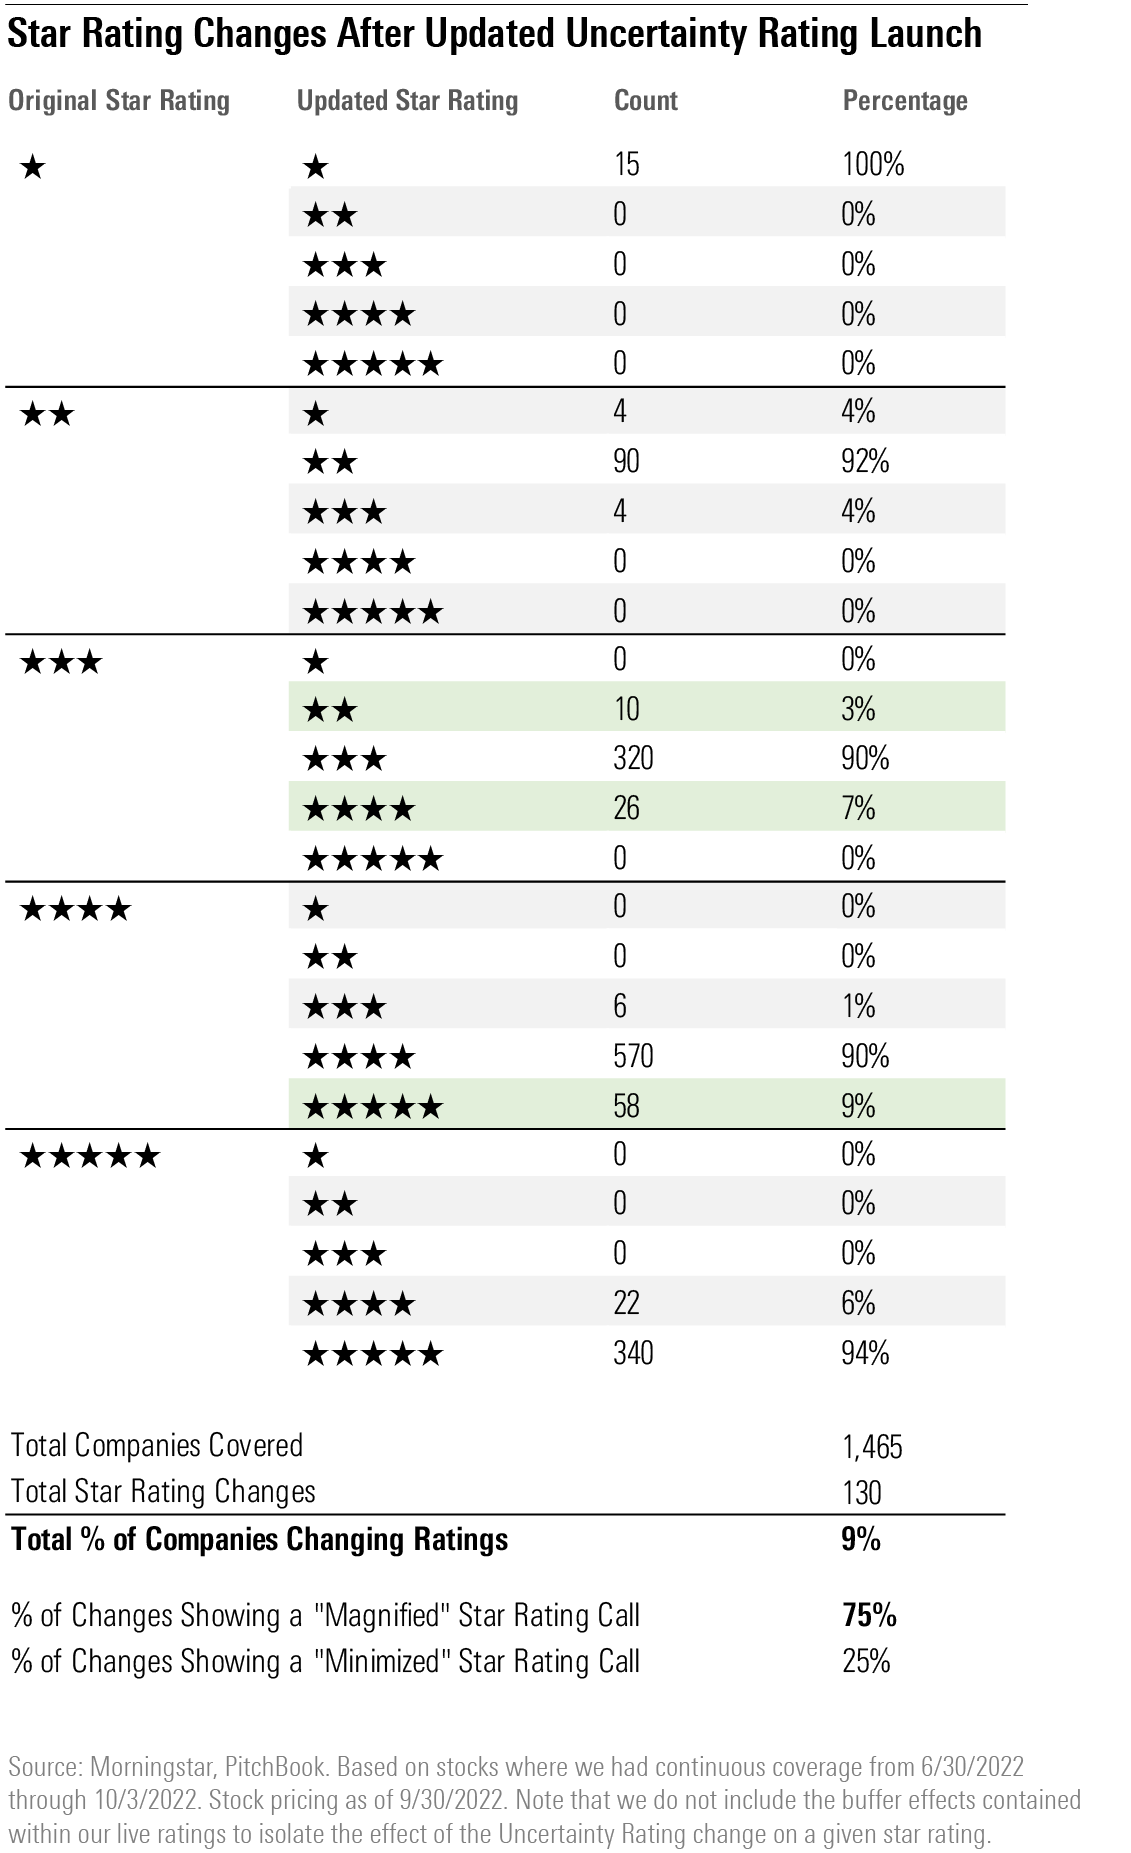 Only 9% of Our Coverage Saw a Change in Star Rating Driven by a Change in Uncertainty Rating, With the Most Common Change Being an Undervalued 4-Star Call Shifting Into a 5-Star Call